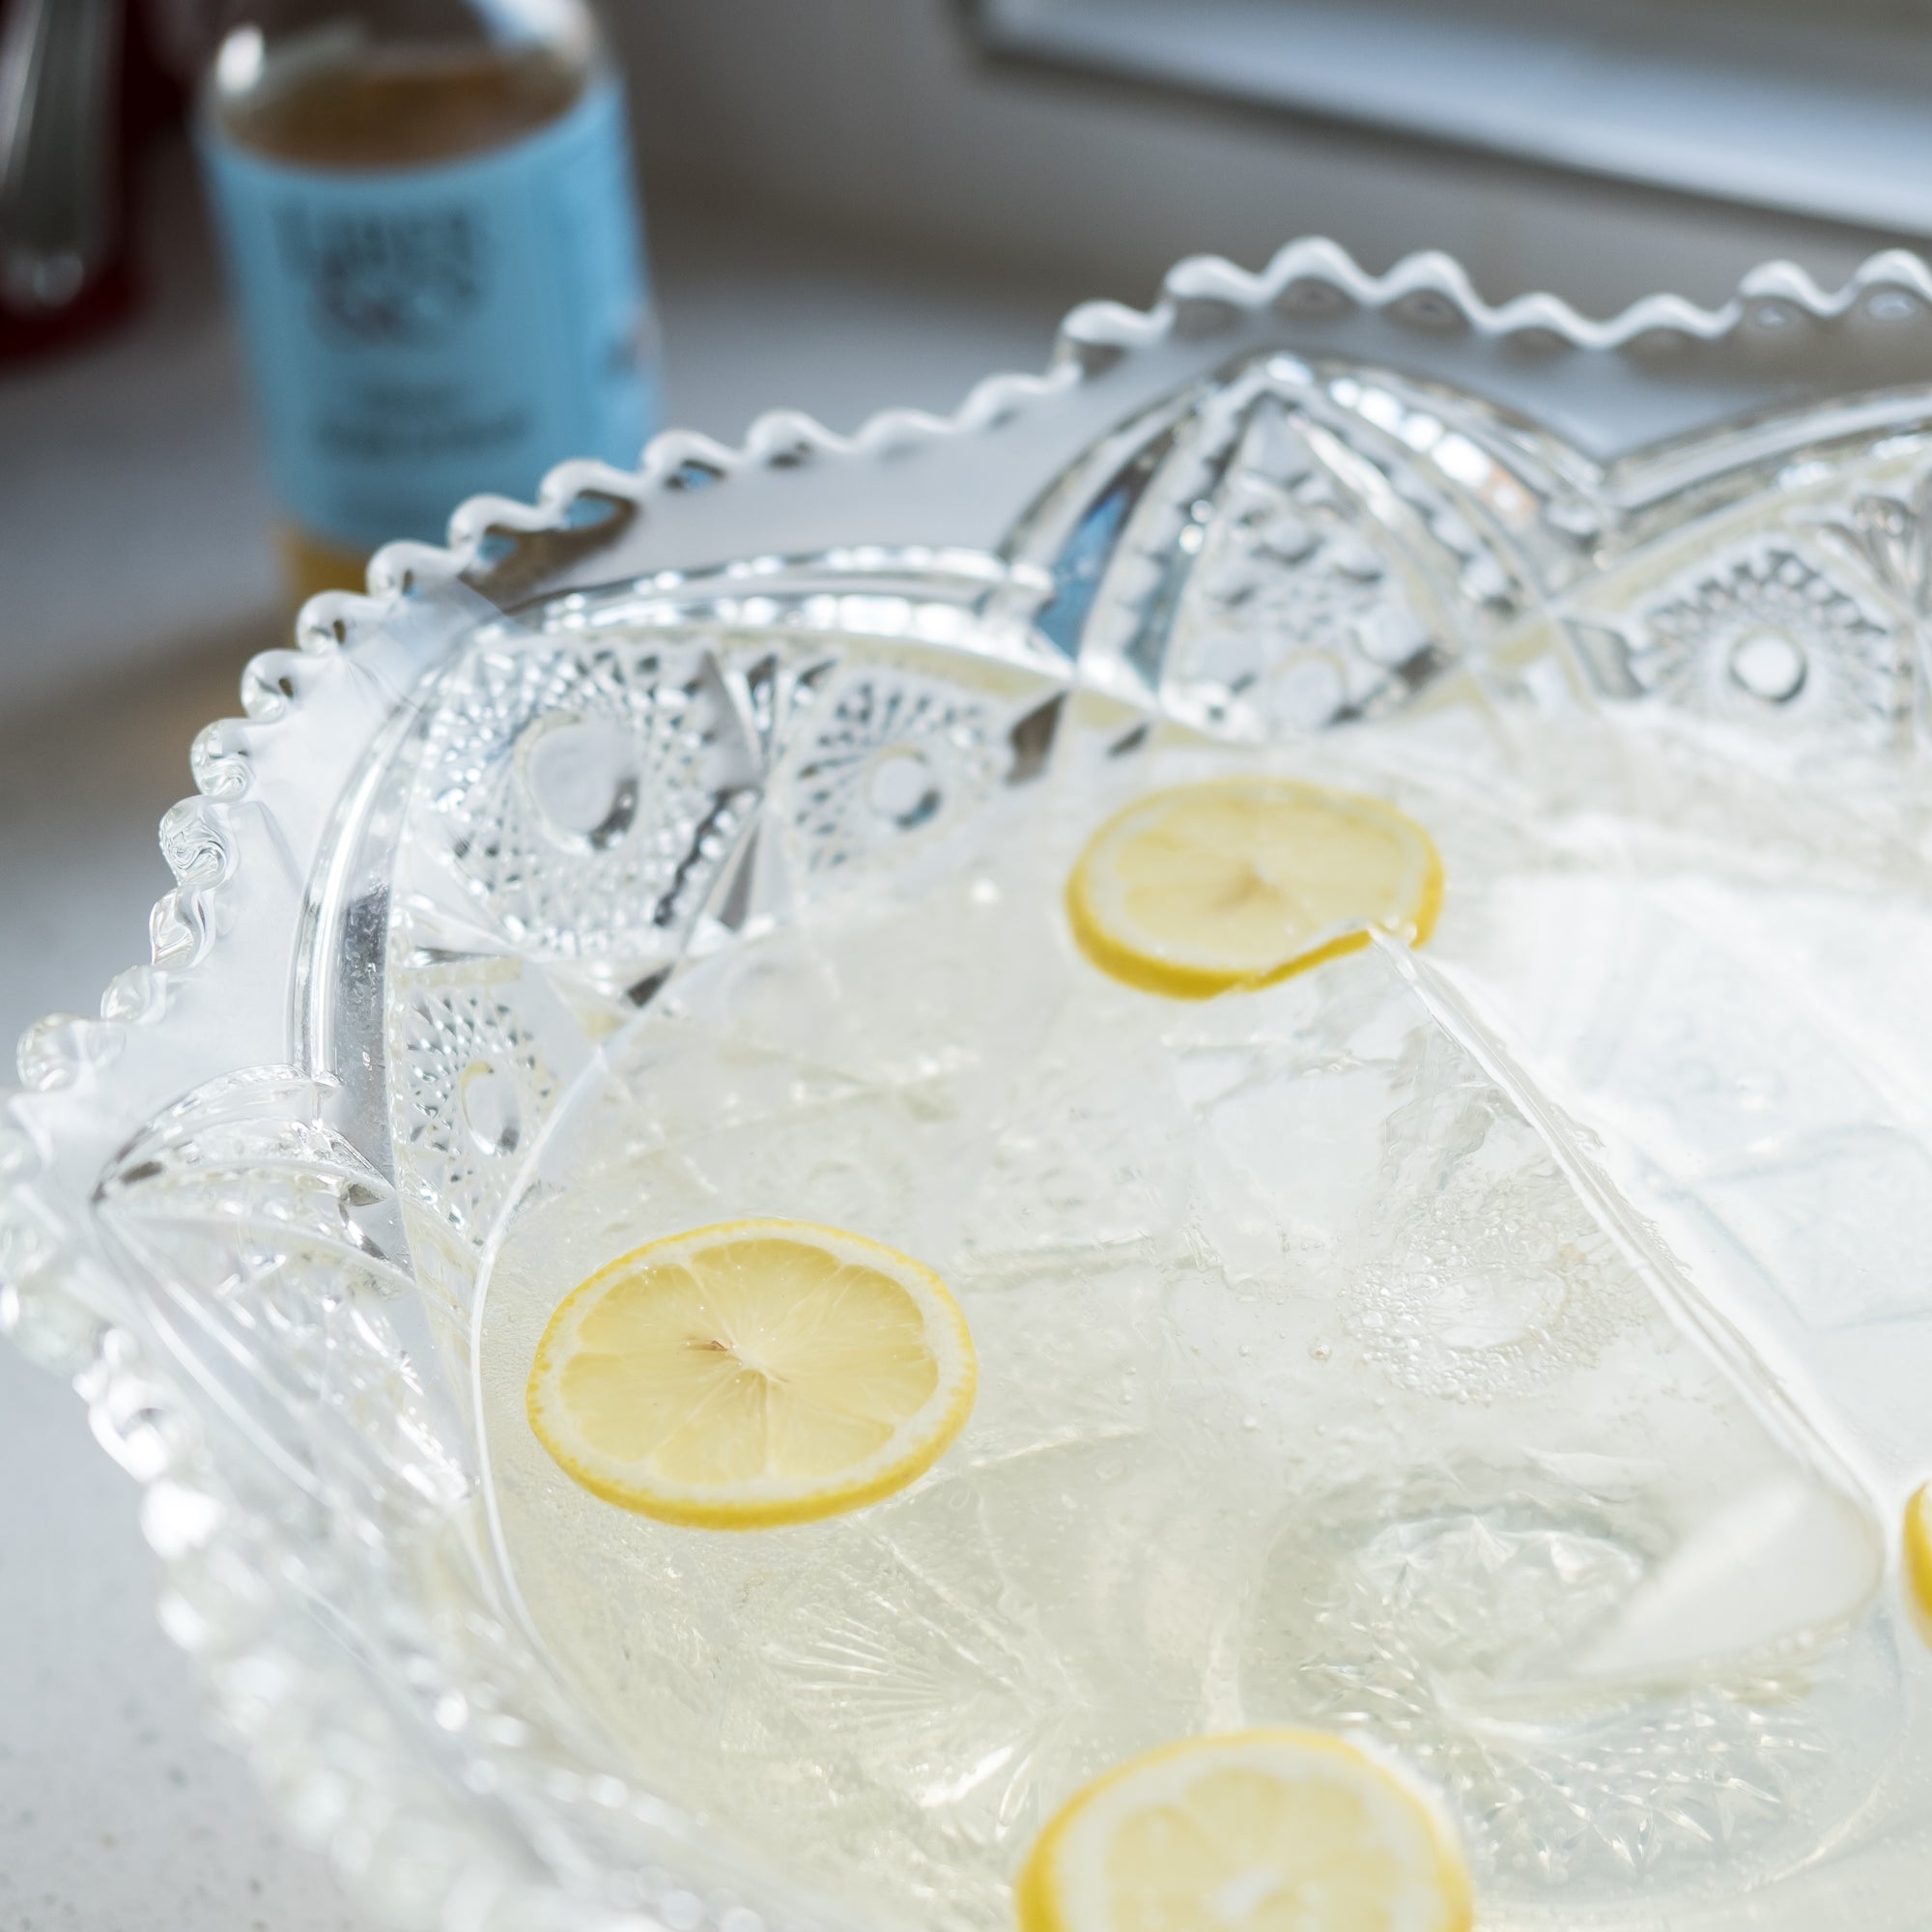 French 75 Punch